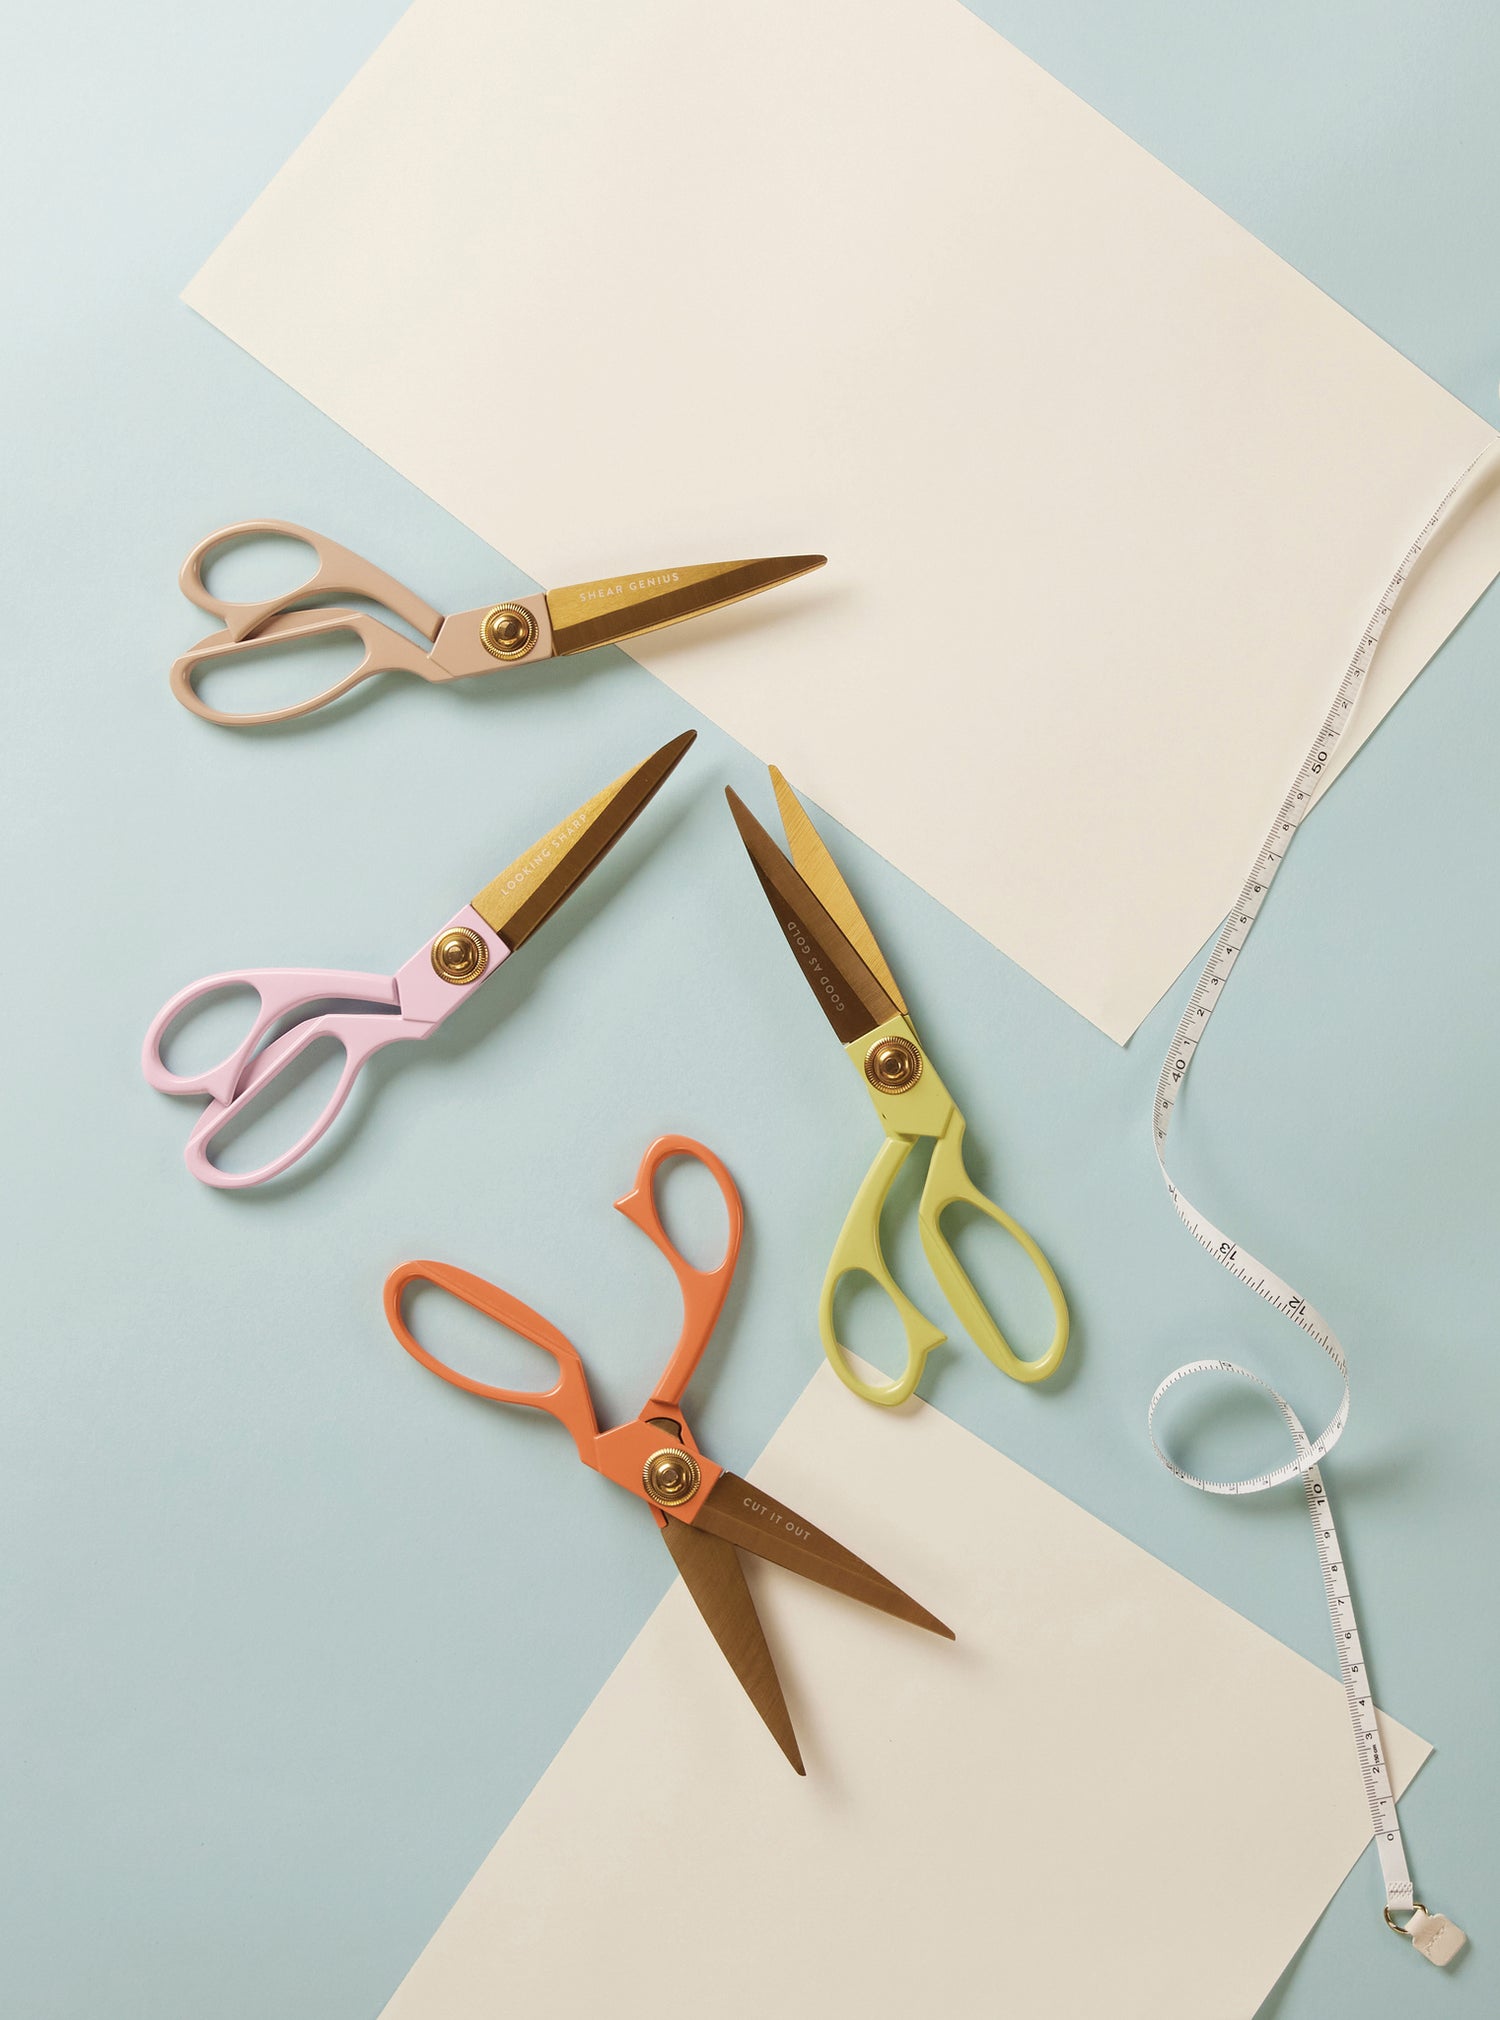 Scissors and paper on a pale background